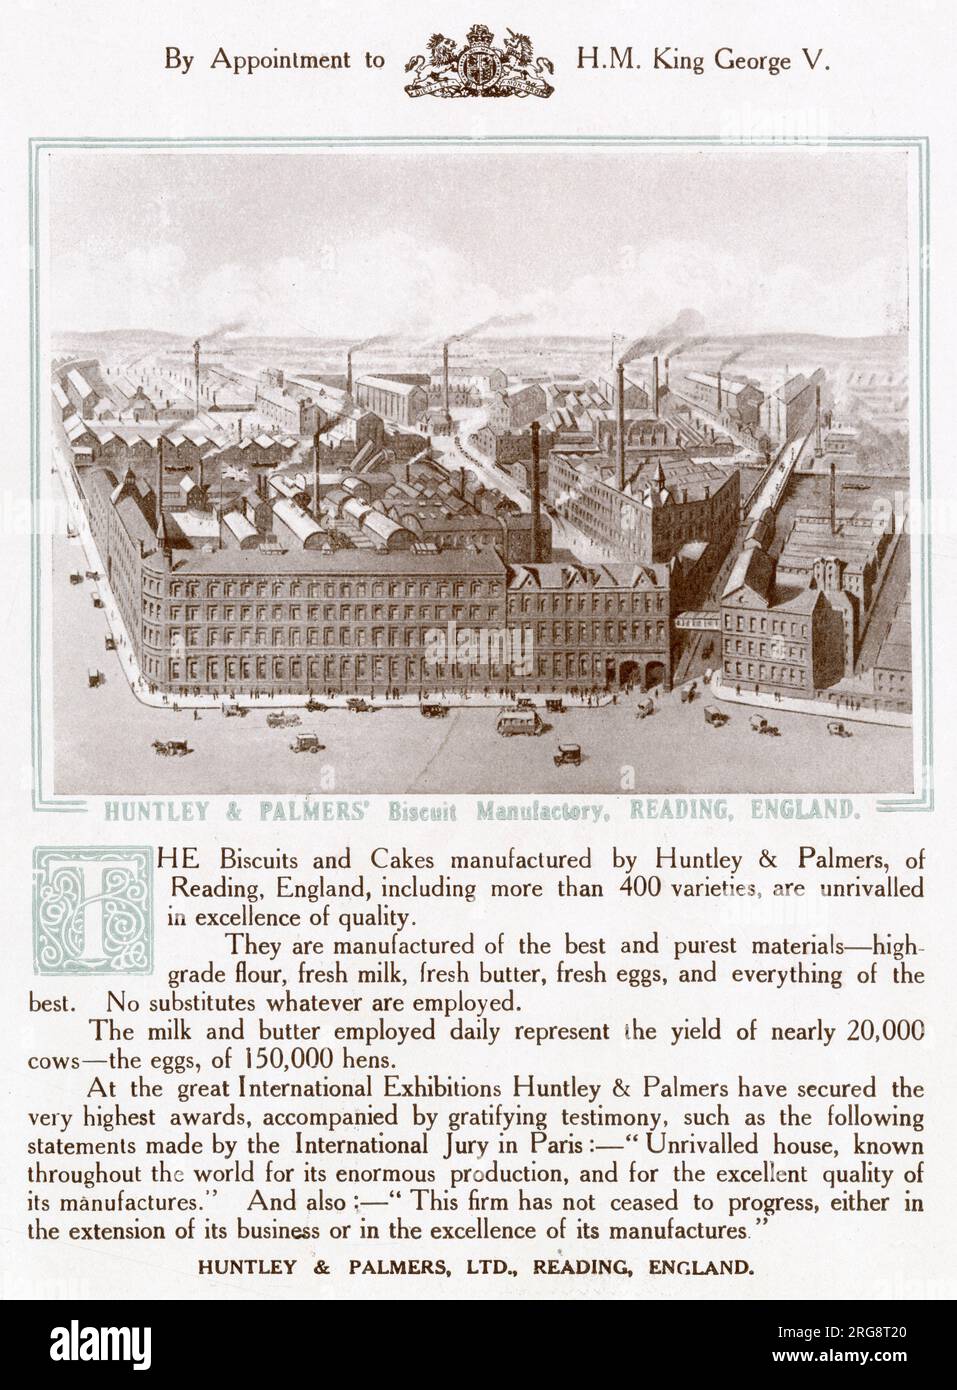 Appointment of H.M. King George V, biscuits and cakes manufacture by Huntley & Palmers, Reading England. Stock Photo